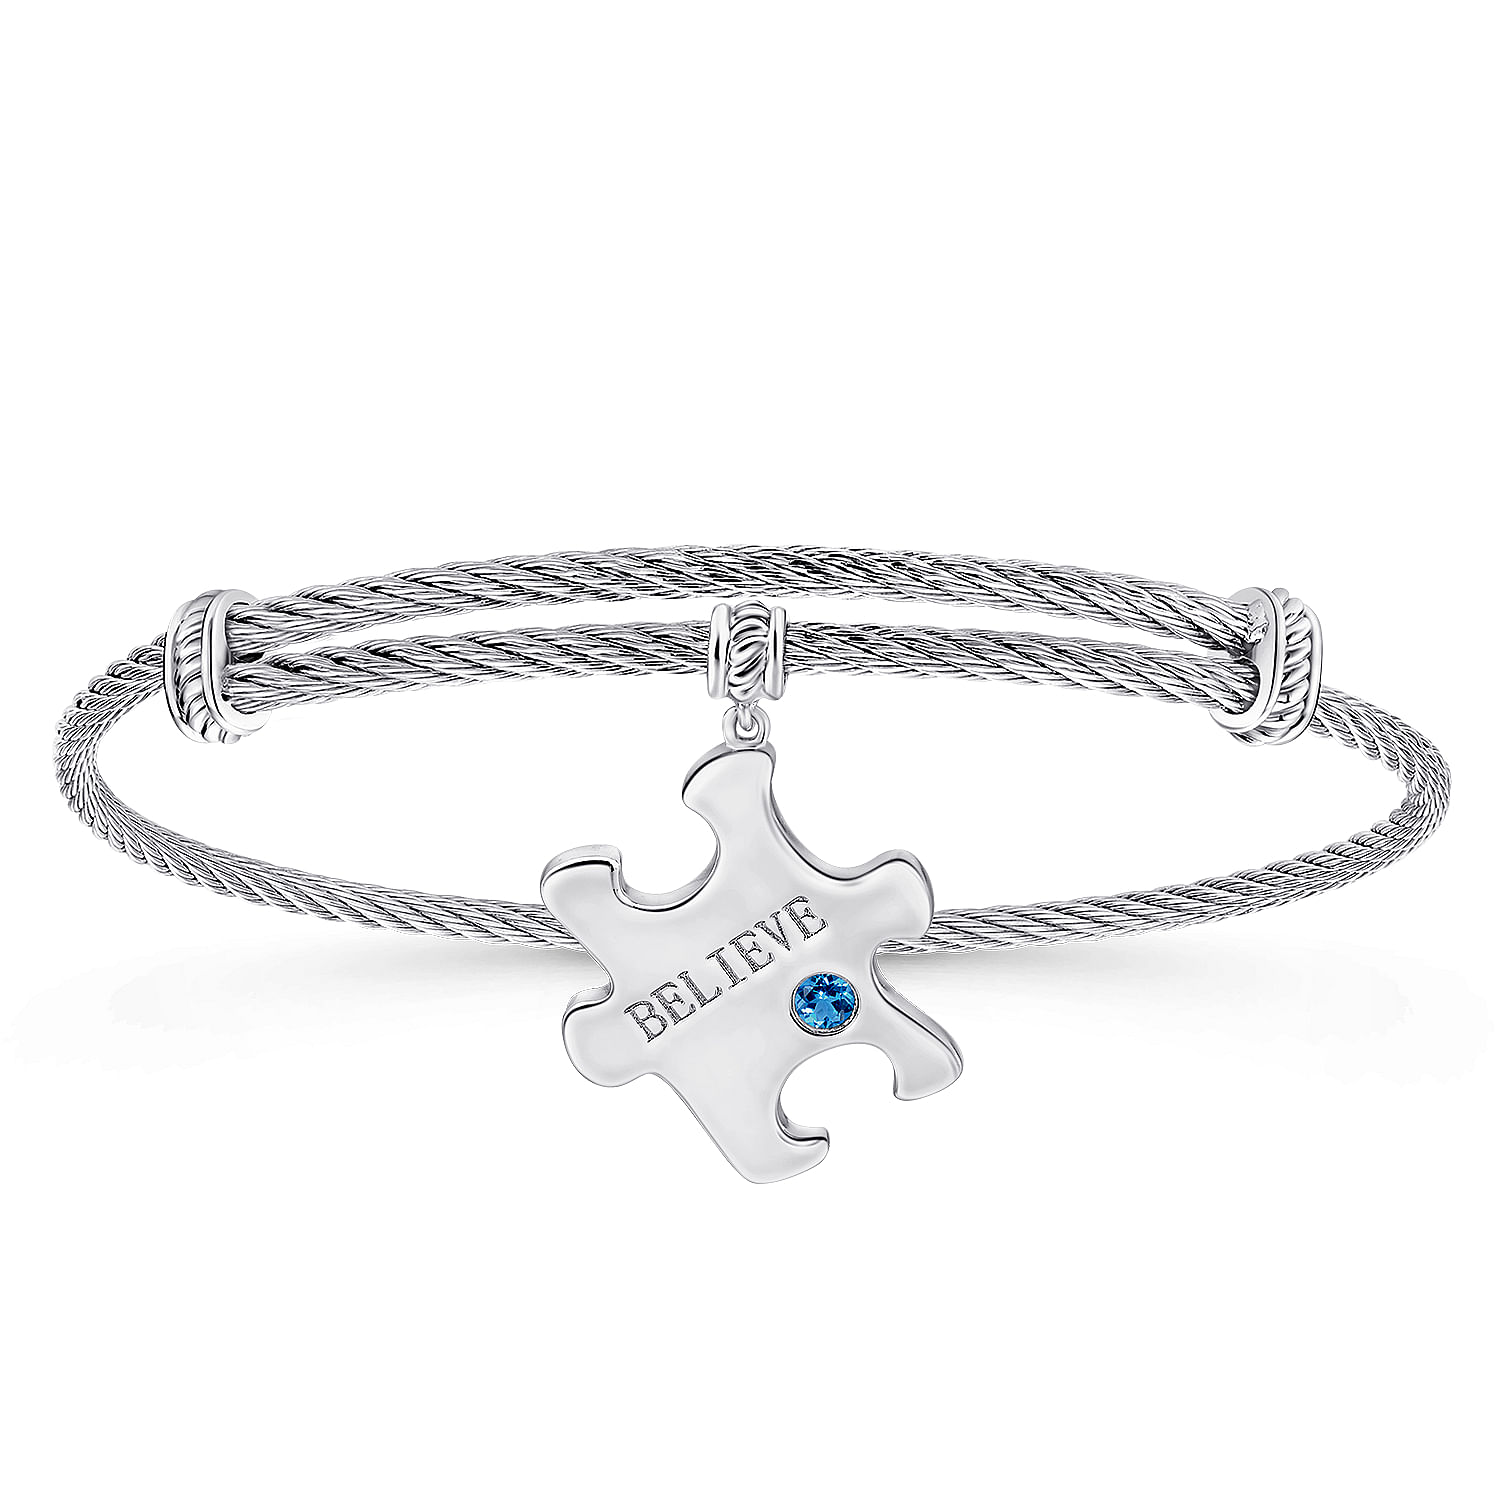 Adjustable Twisted Cable Stainless Steel Bangle with Sterling Silver Blue Topaz Puzzle Piece Charm